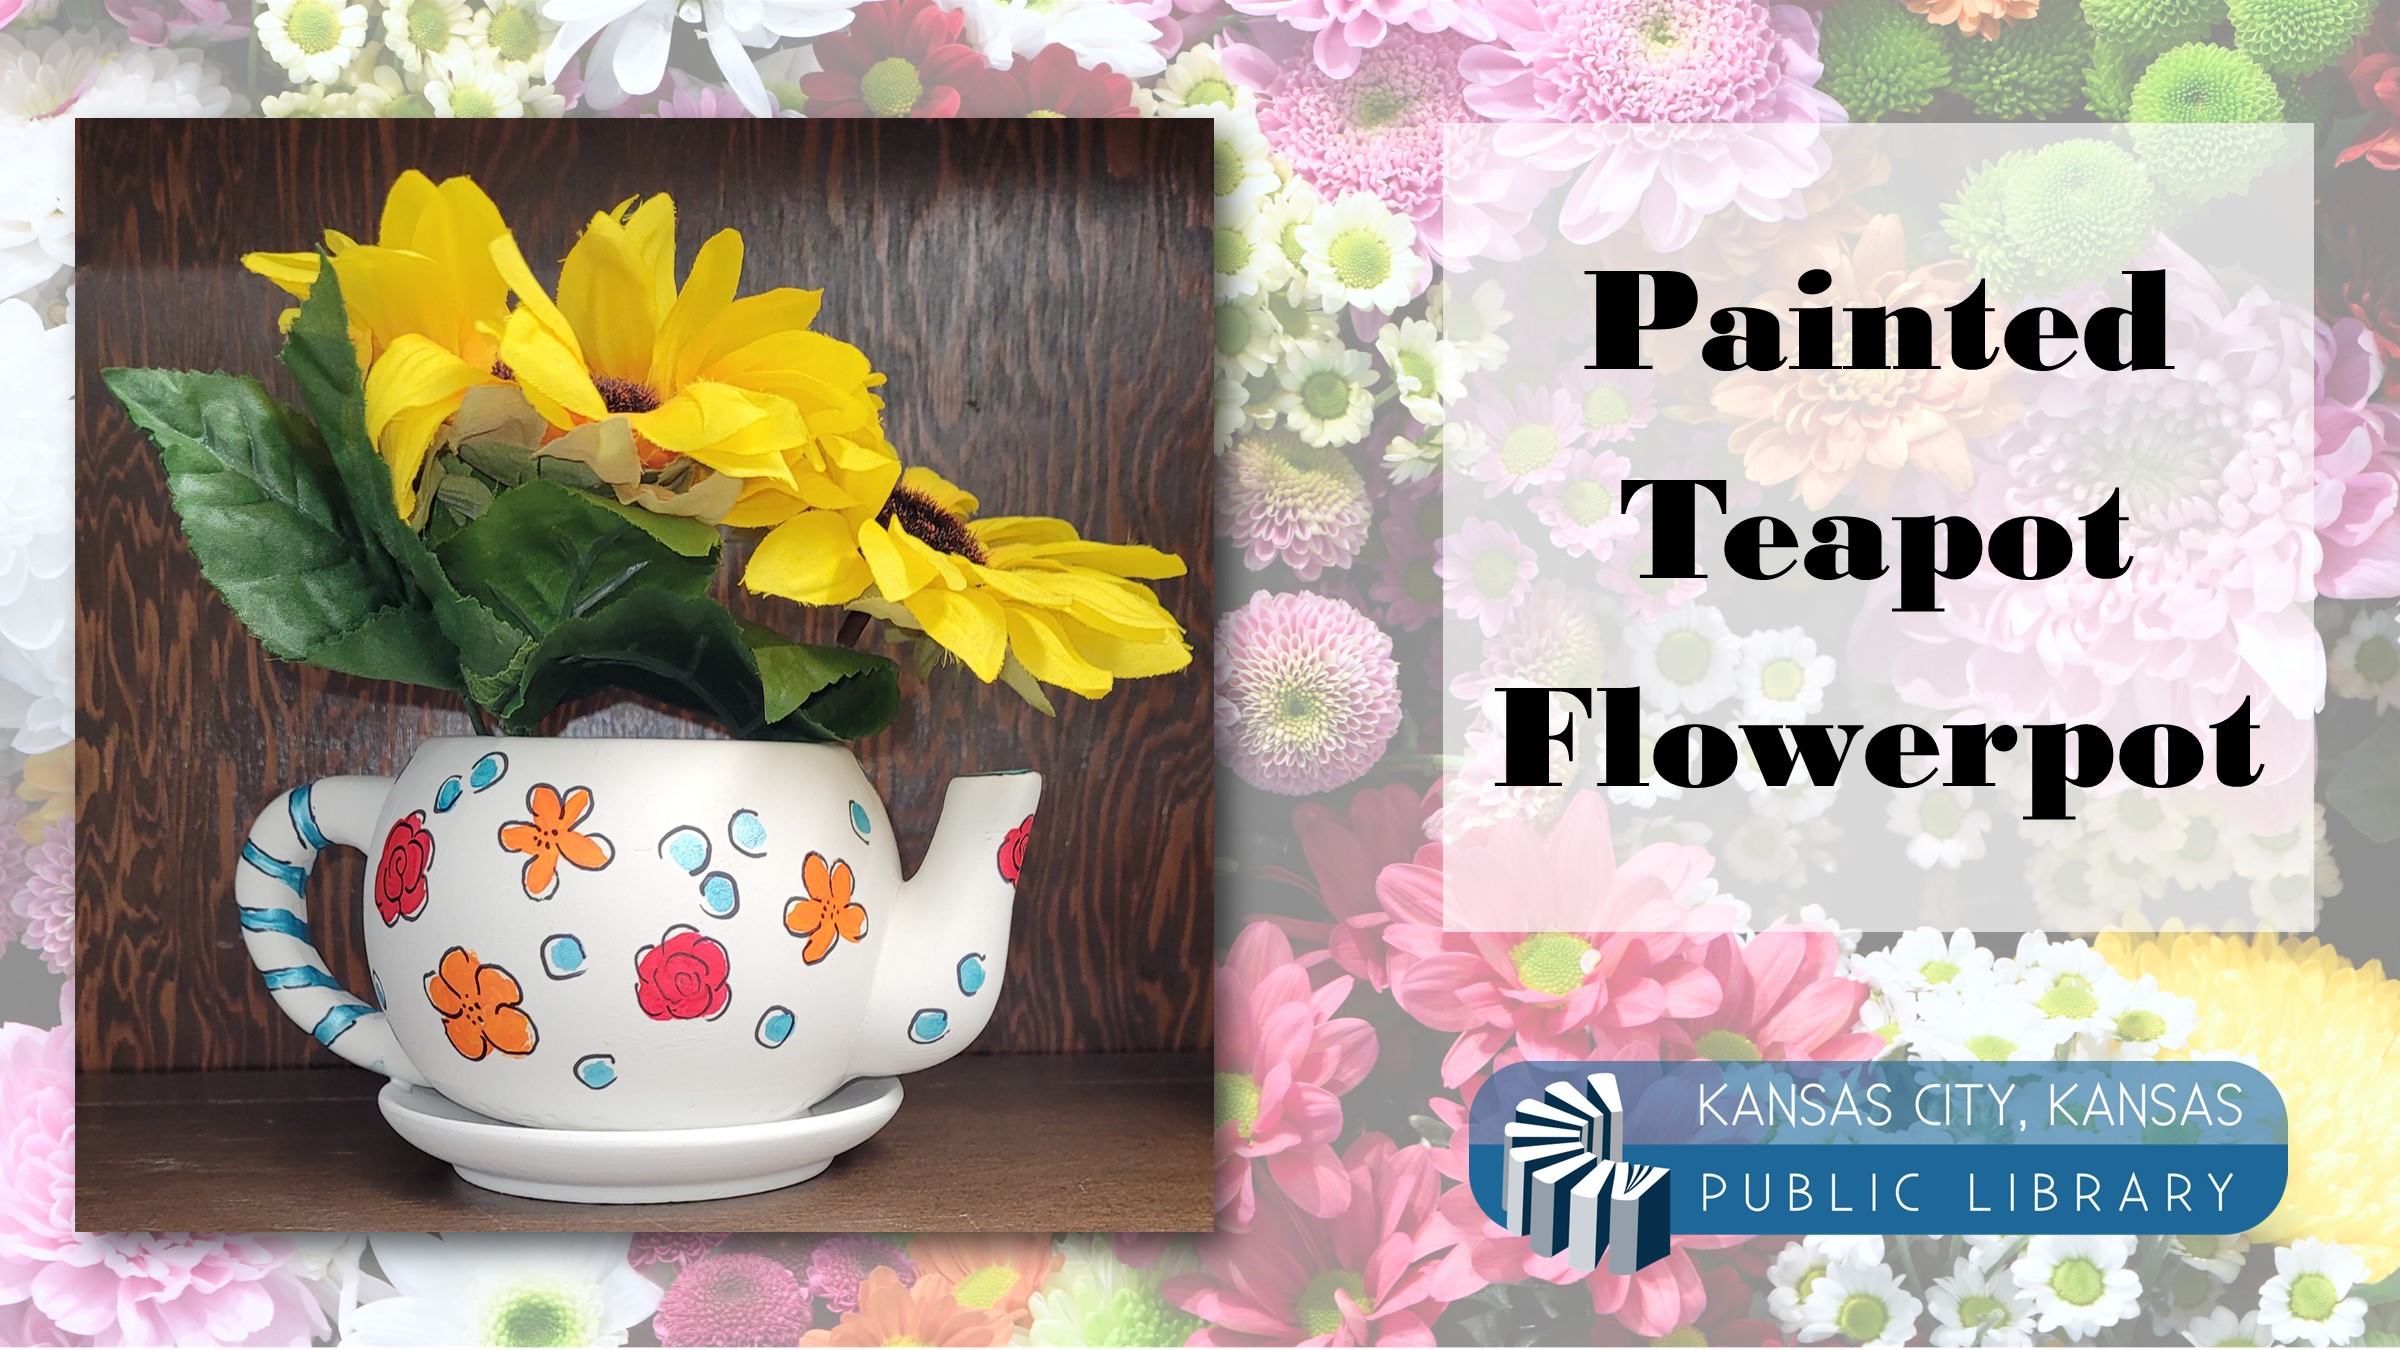 painted teapot planter & library logo on a field of flowers